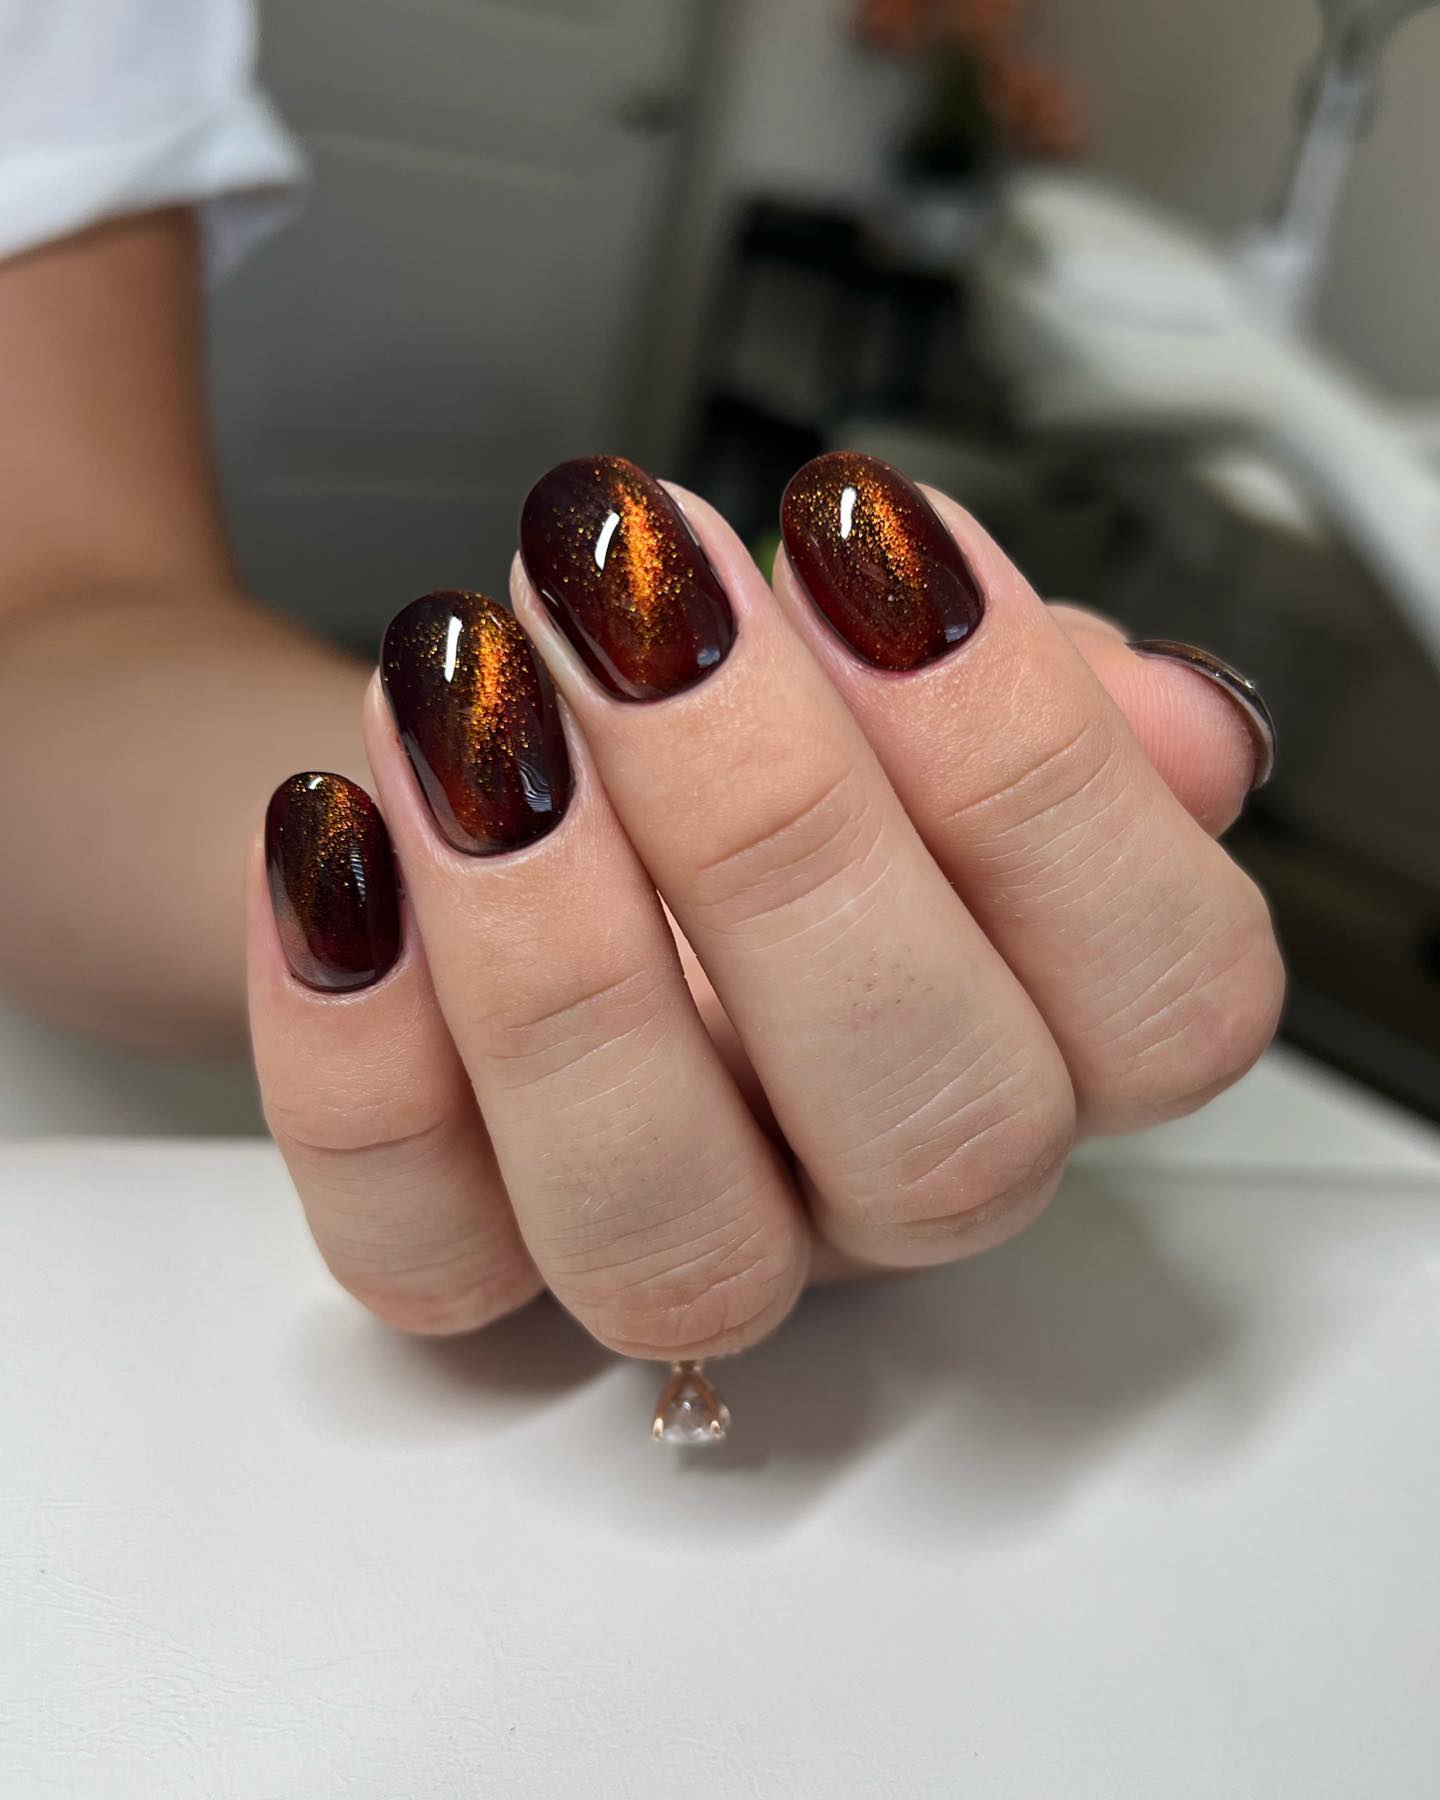 On a dark brown base, orange aurora cat eye design will shine out. If you want to stand out easily and look chic especially in Autumn, give it a shot.